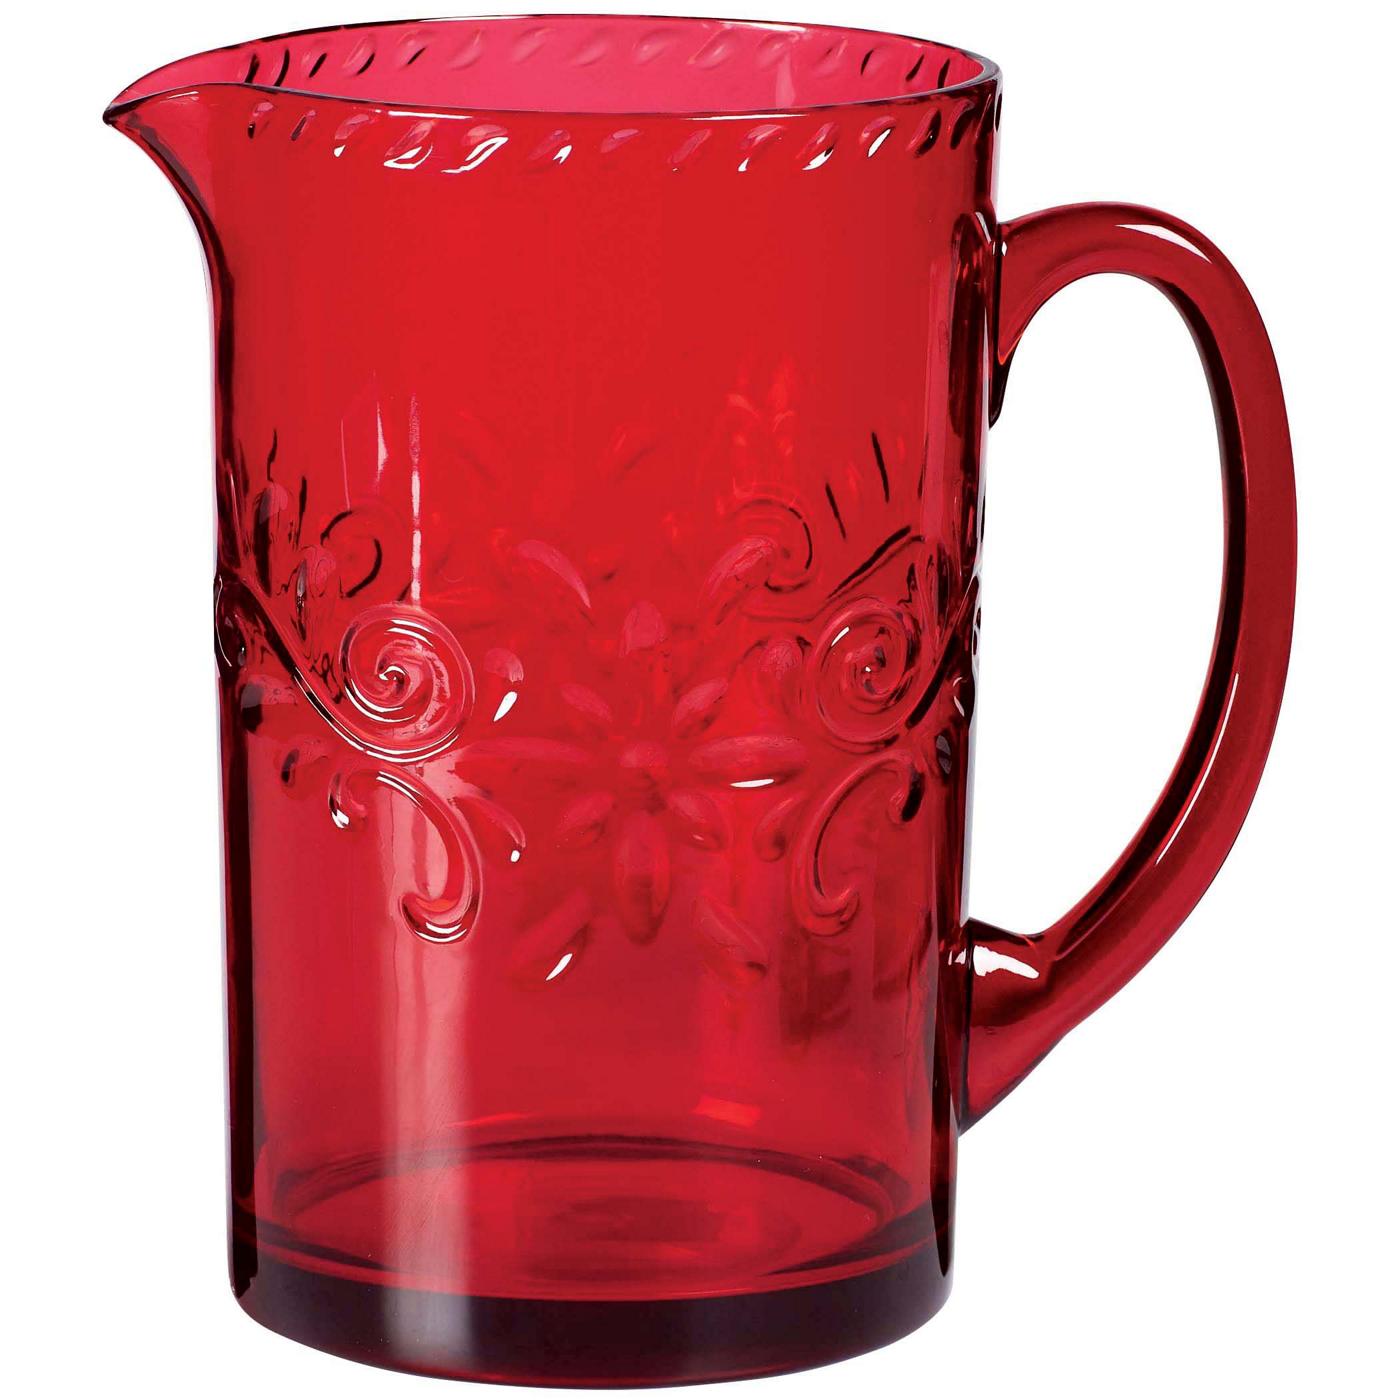 Libbey Camelot Footed Glass Pitcher - Shop Glasses & Mugs at H-E-B